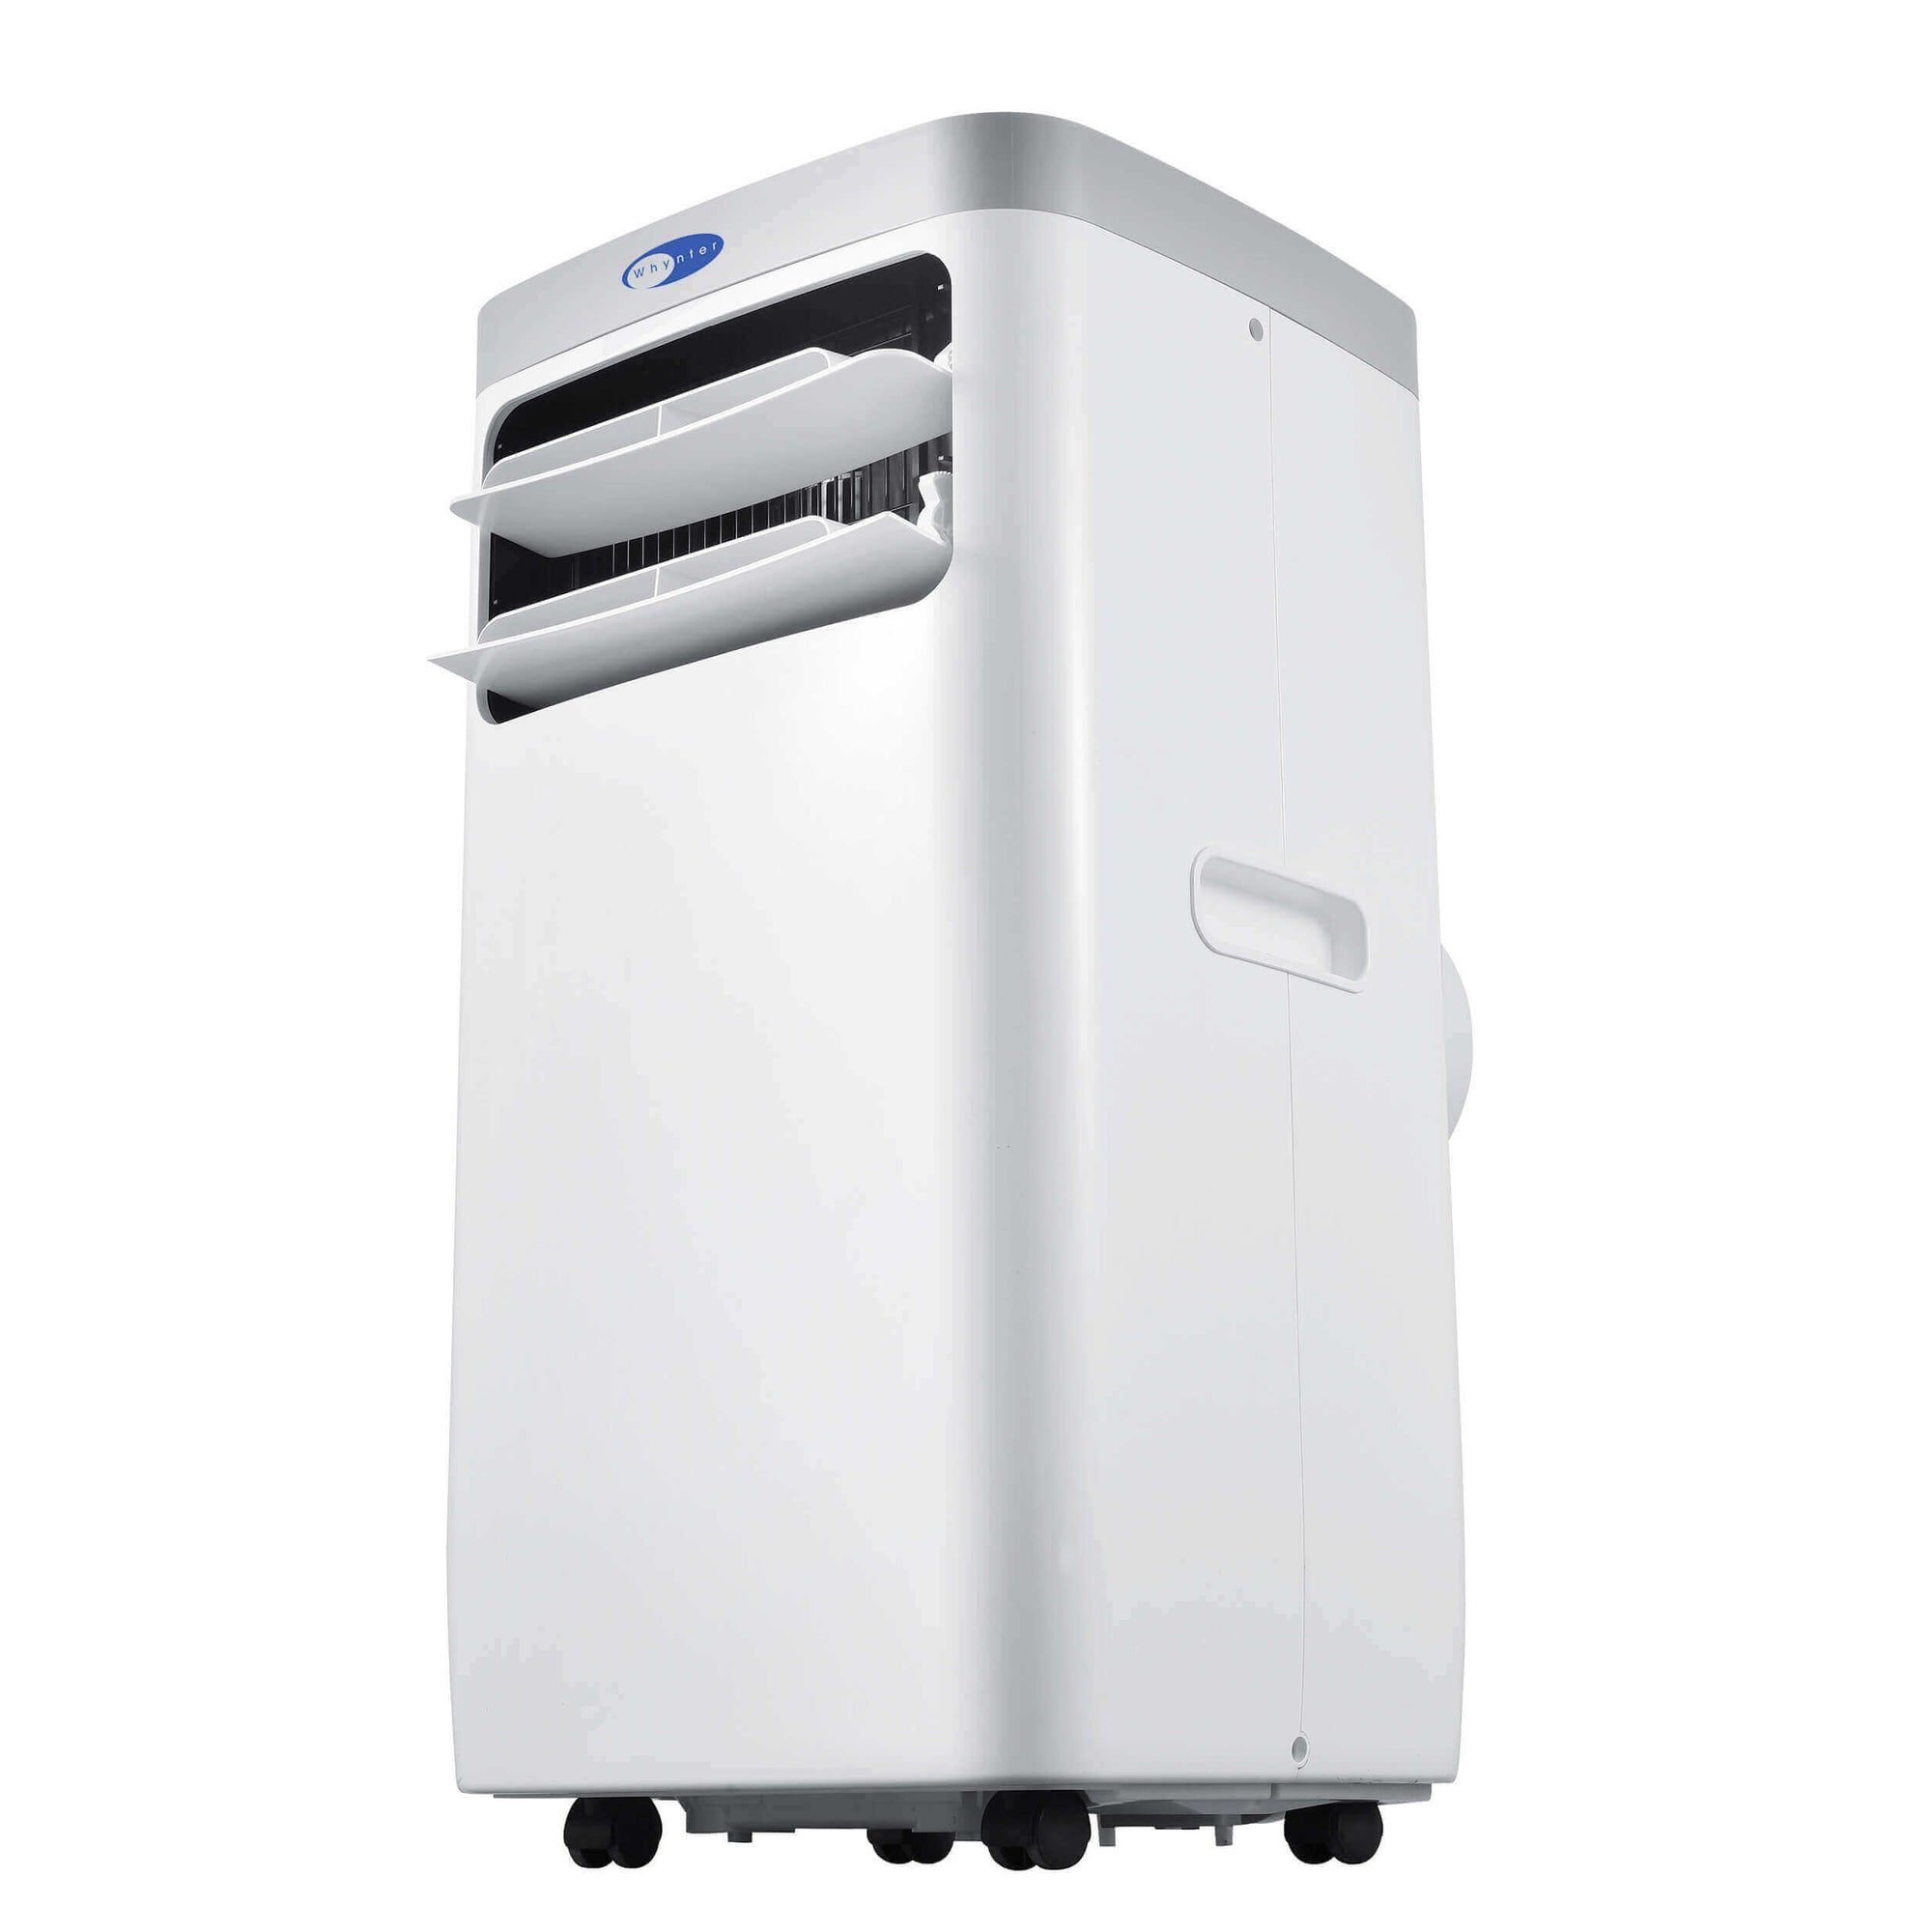 Whynter ARC-115WG 11,000 BTU Portable Air Conditioner and Dehumidifier White New